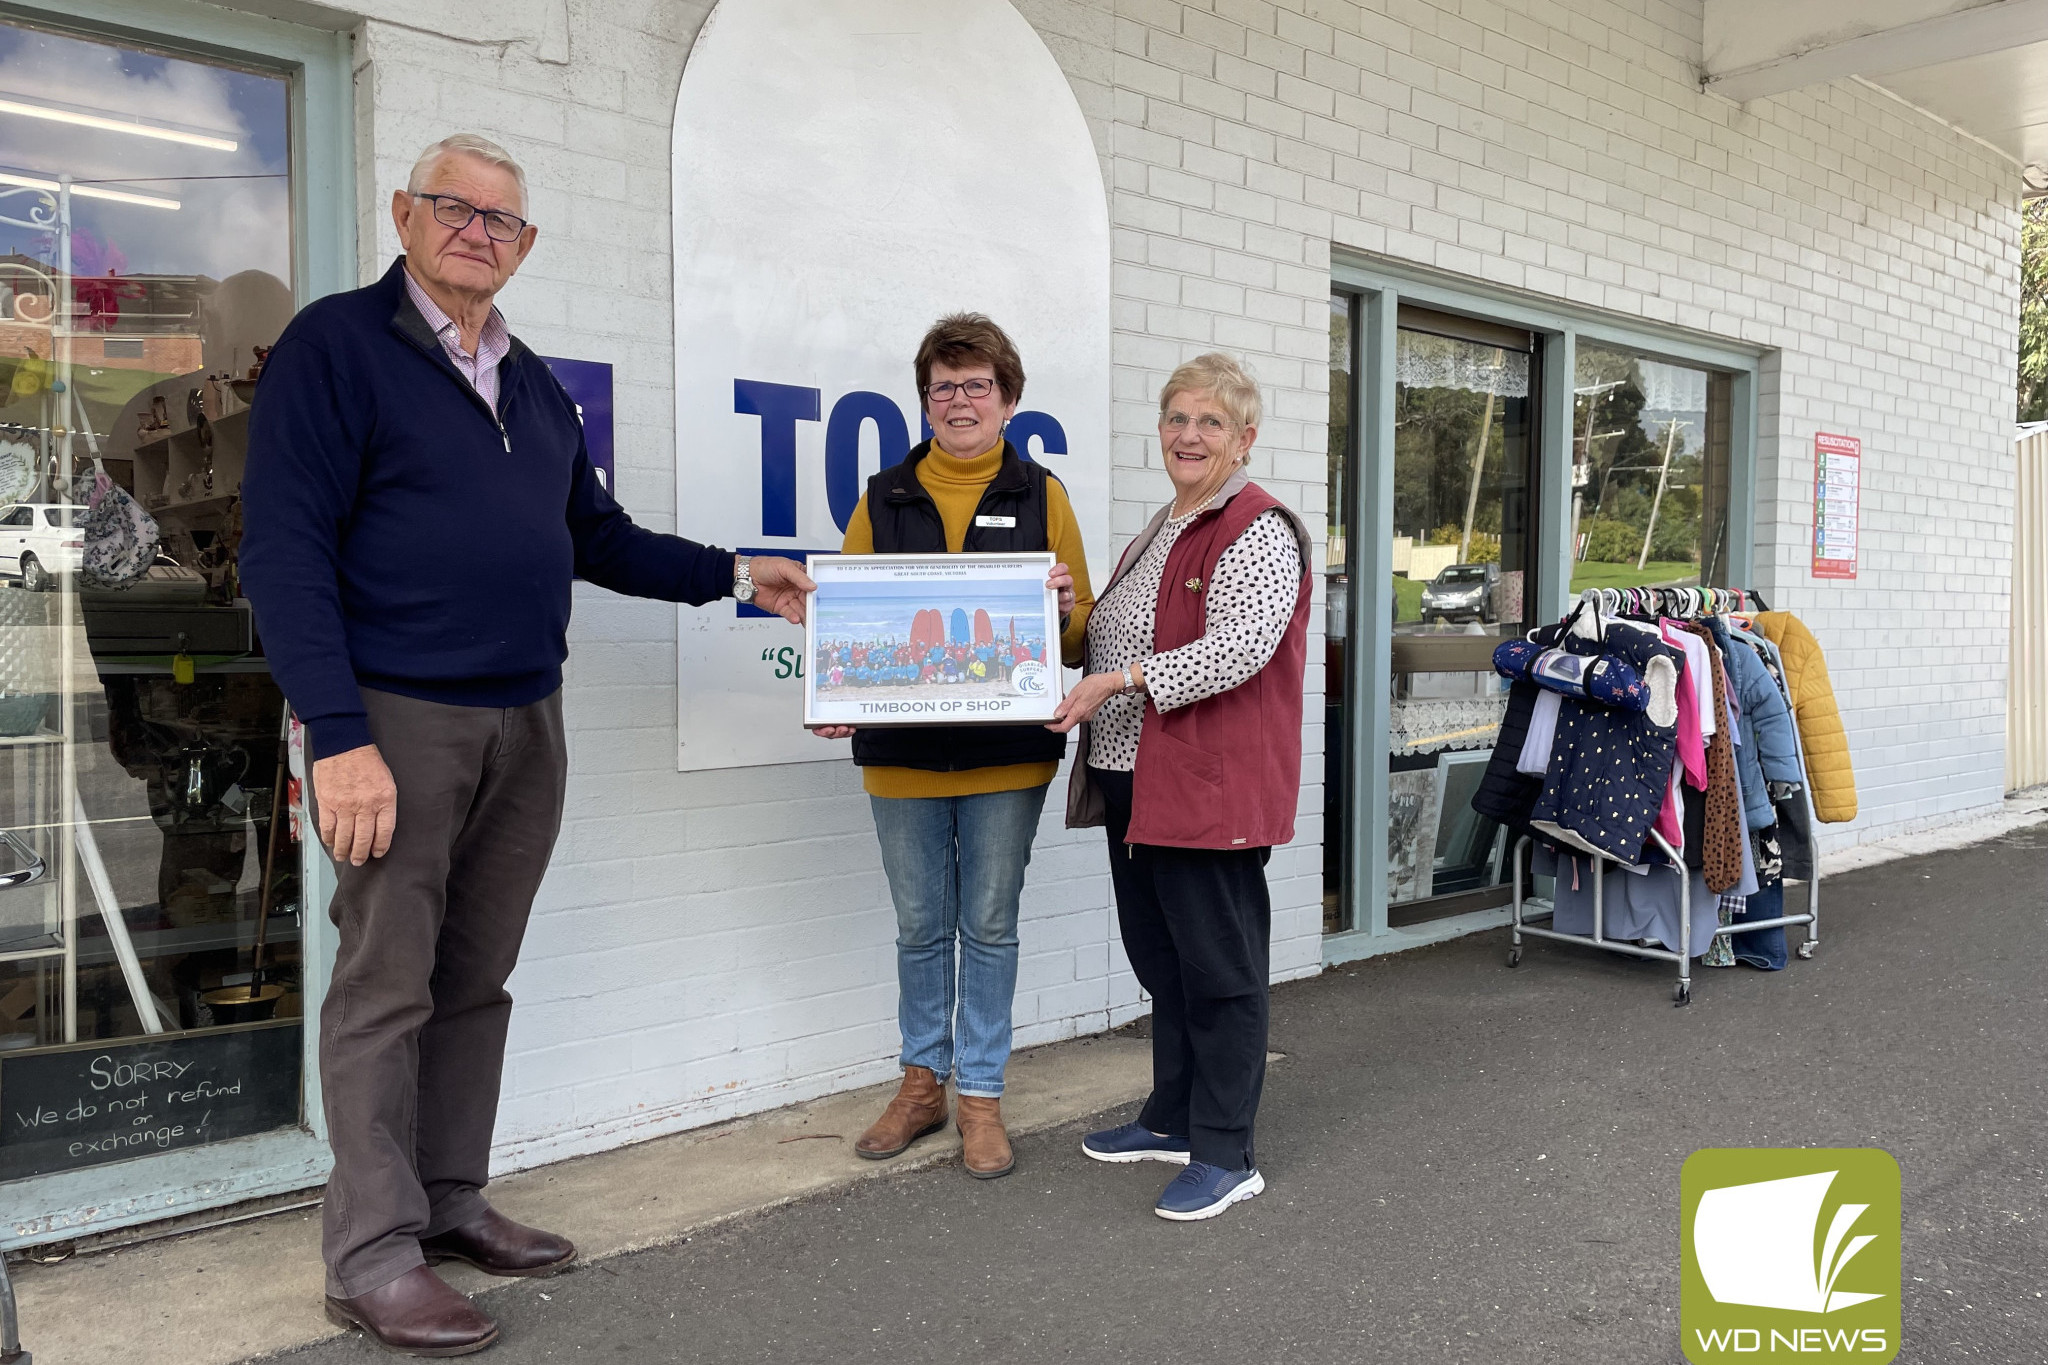 Support appreciated: Disabled Surfers Great South Coast Victoria treasurer Peter Pope thanks TOPS volunteers Evelyn Thompson and Brenda Parfett for their support.